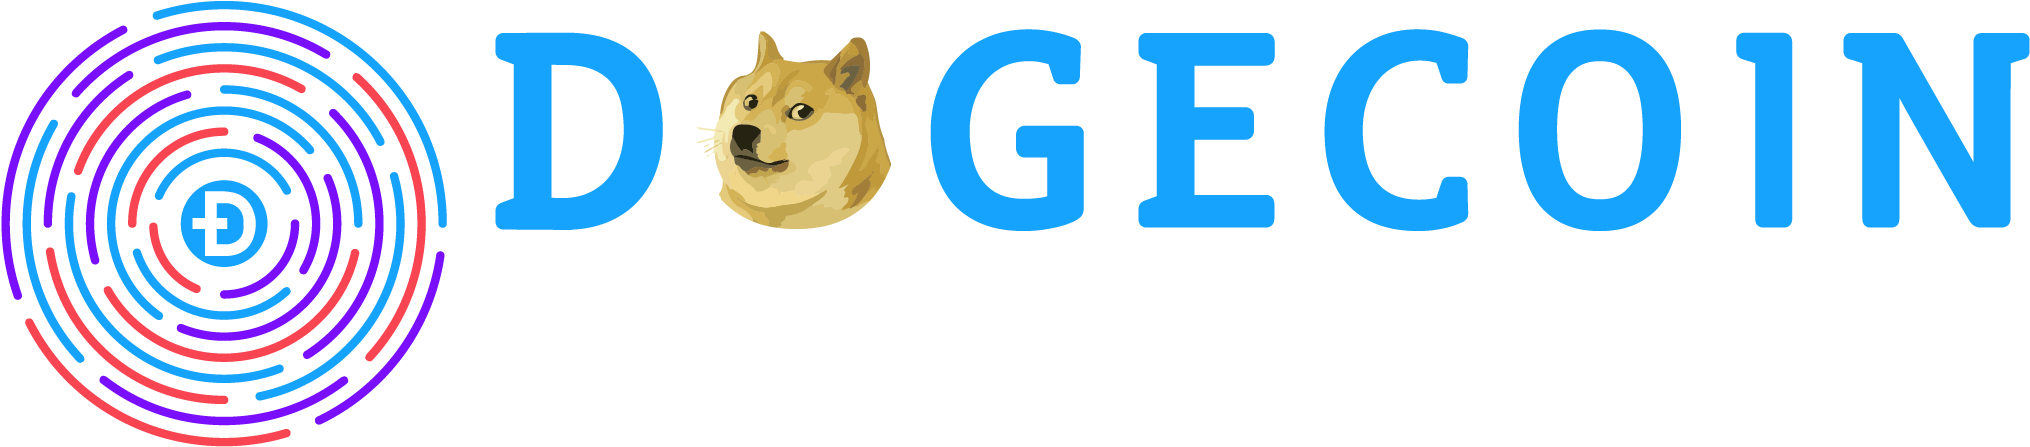 Dogecoin News Graphic PNG image